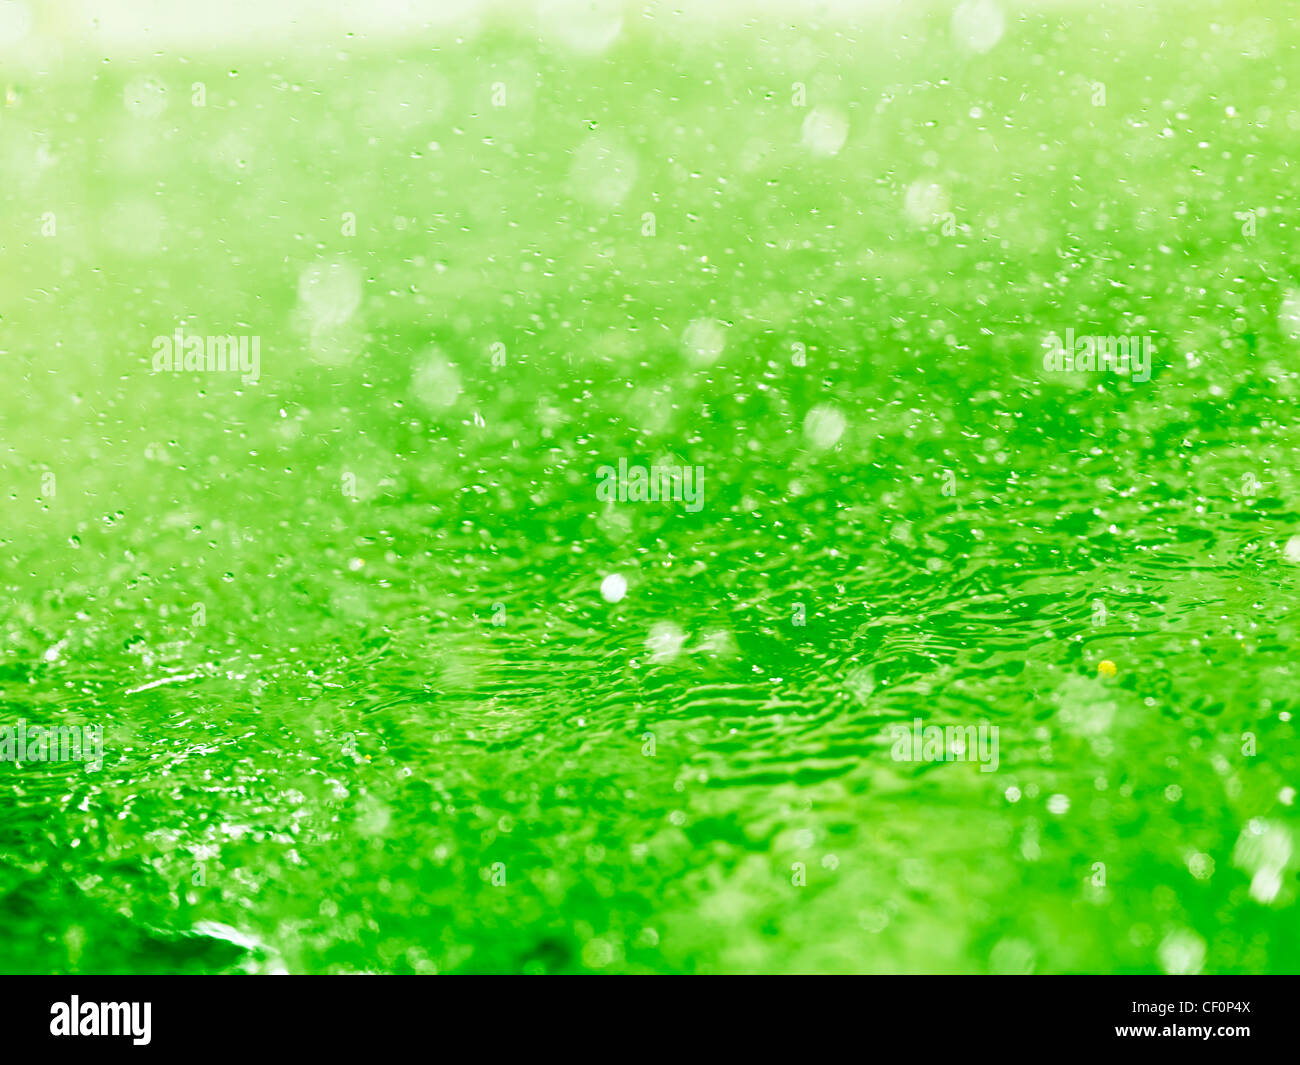 Lime green splashing water closeup abstract background texture Stock Photo